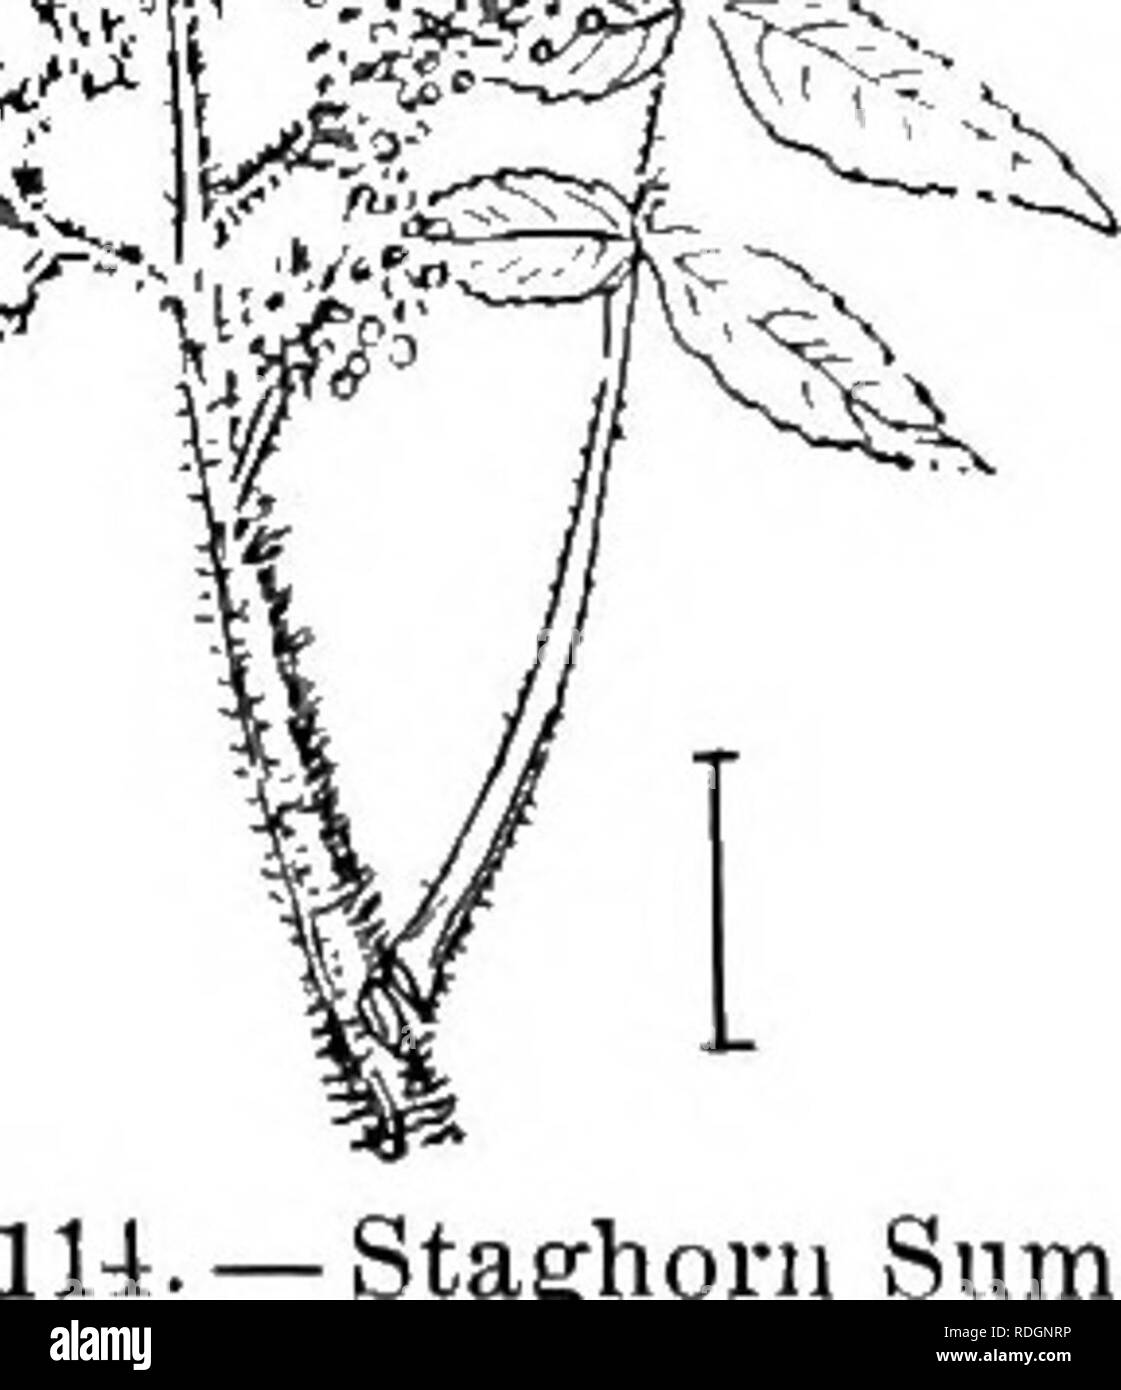 . Ornamental shrubs of the United States (hardy, cultivated). Shrubs. 106 DESCRIPTIONS OF THE SHRUBS KEY TO THE SPECIES OF STAPHYLEA * Leaves with 3 blades. (A.) A. All the blades short-stalked with serrate awned edges lj-2^ inches long; fruit 2-lobed and flattened, about an inch long; small shrub to 6 feet, from Japan. Japan Bladder Nut—. Staphylea Bumalda. A. End blade long-stalked, all finely serrated; upright shrub with stout branches 6-15 feet high ; pod 1^2 inches long. American Bladder Nut (111) — Staphylea trifblia. A. Similar to the last but the blades smoother and nearly orbicular; f Stock Photo